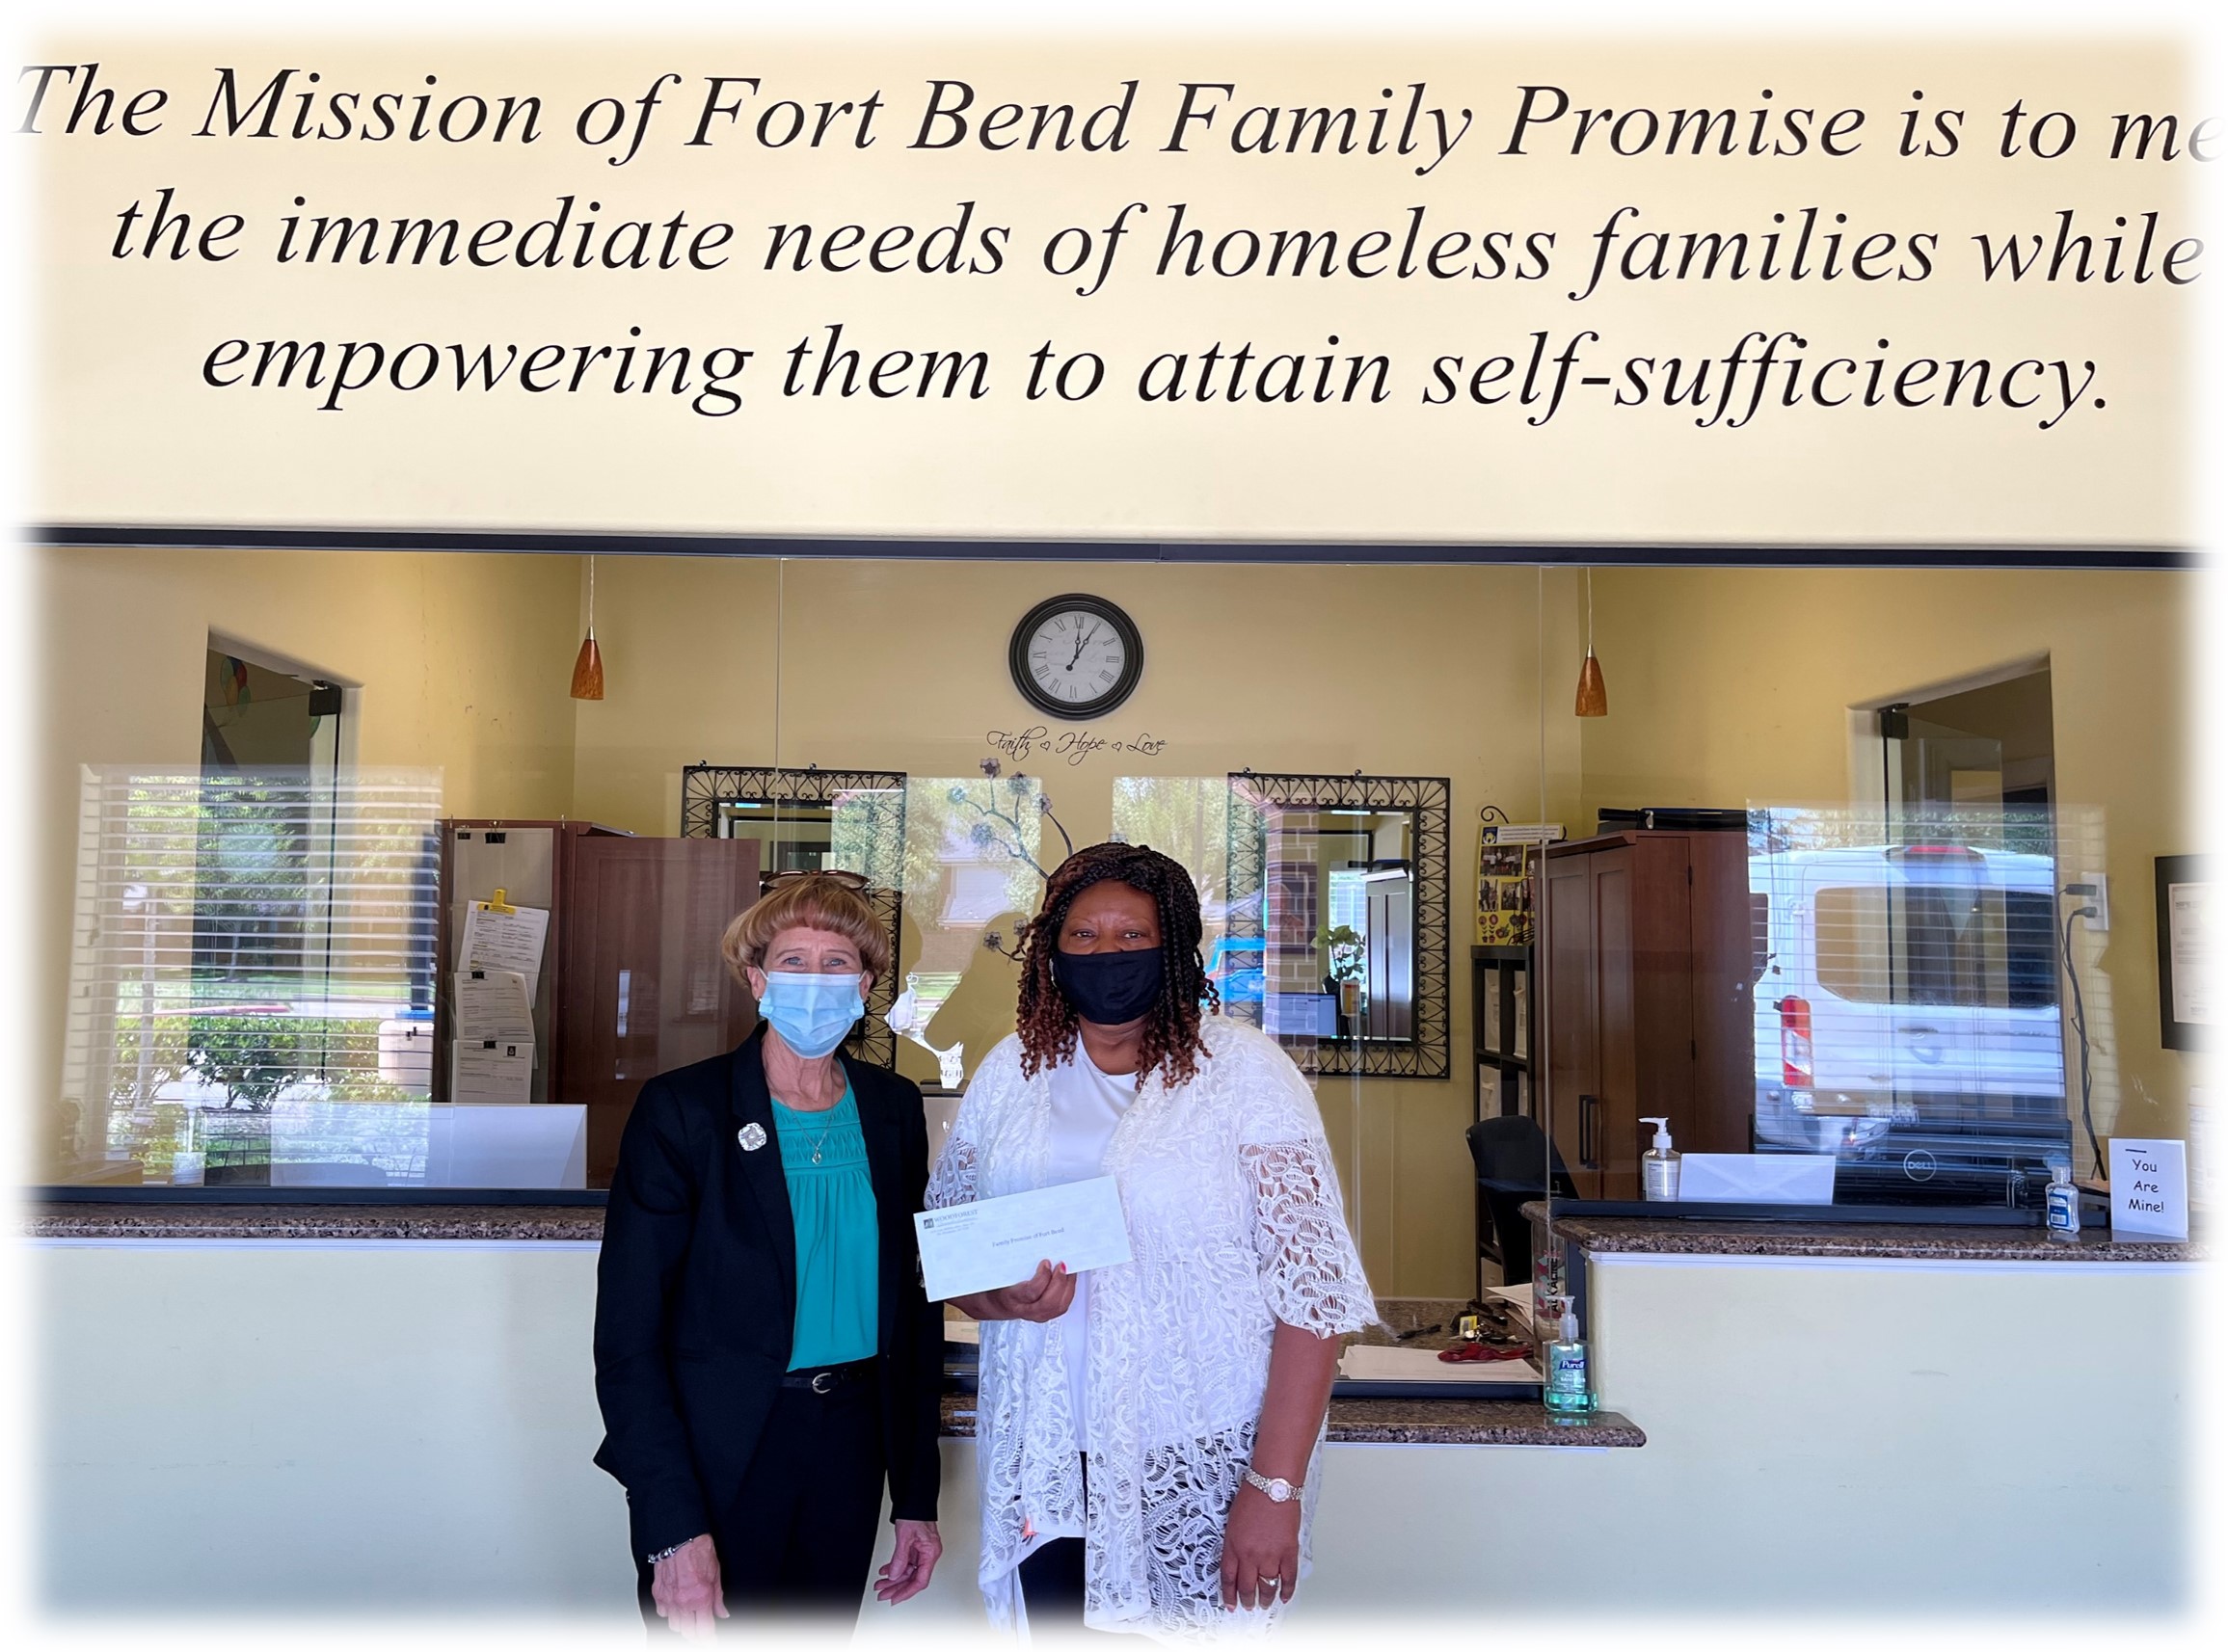 Family Promise of Fort Bend recently received a $2,500 donation from WCF.